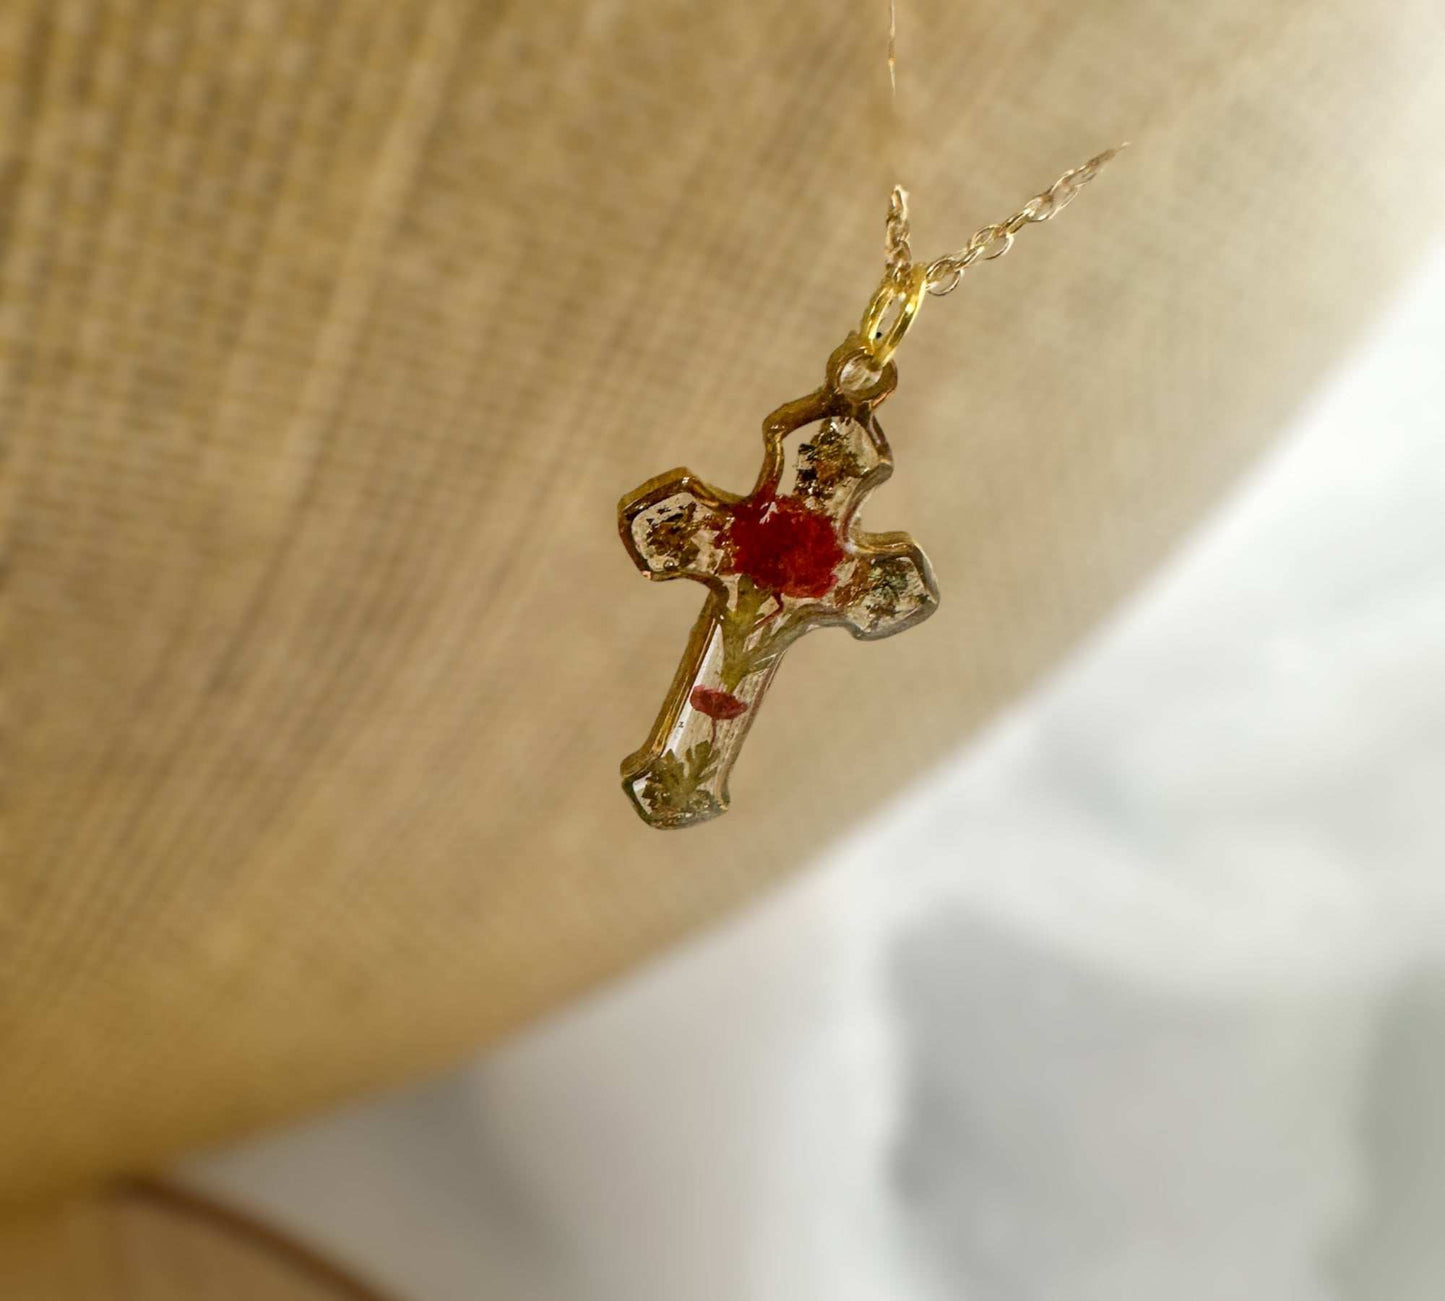 Floral Cross Pendant - Blossoming Faith Collection wtih Dried Flowers